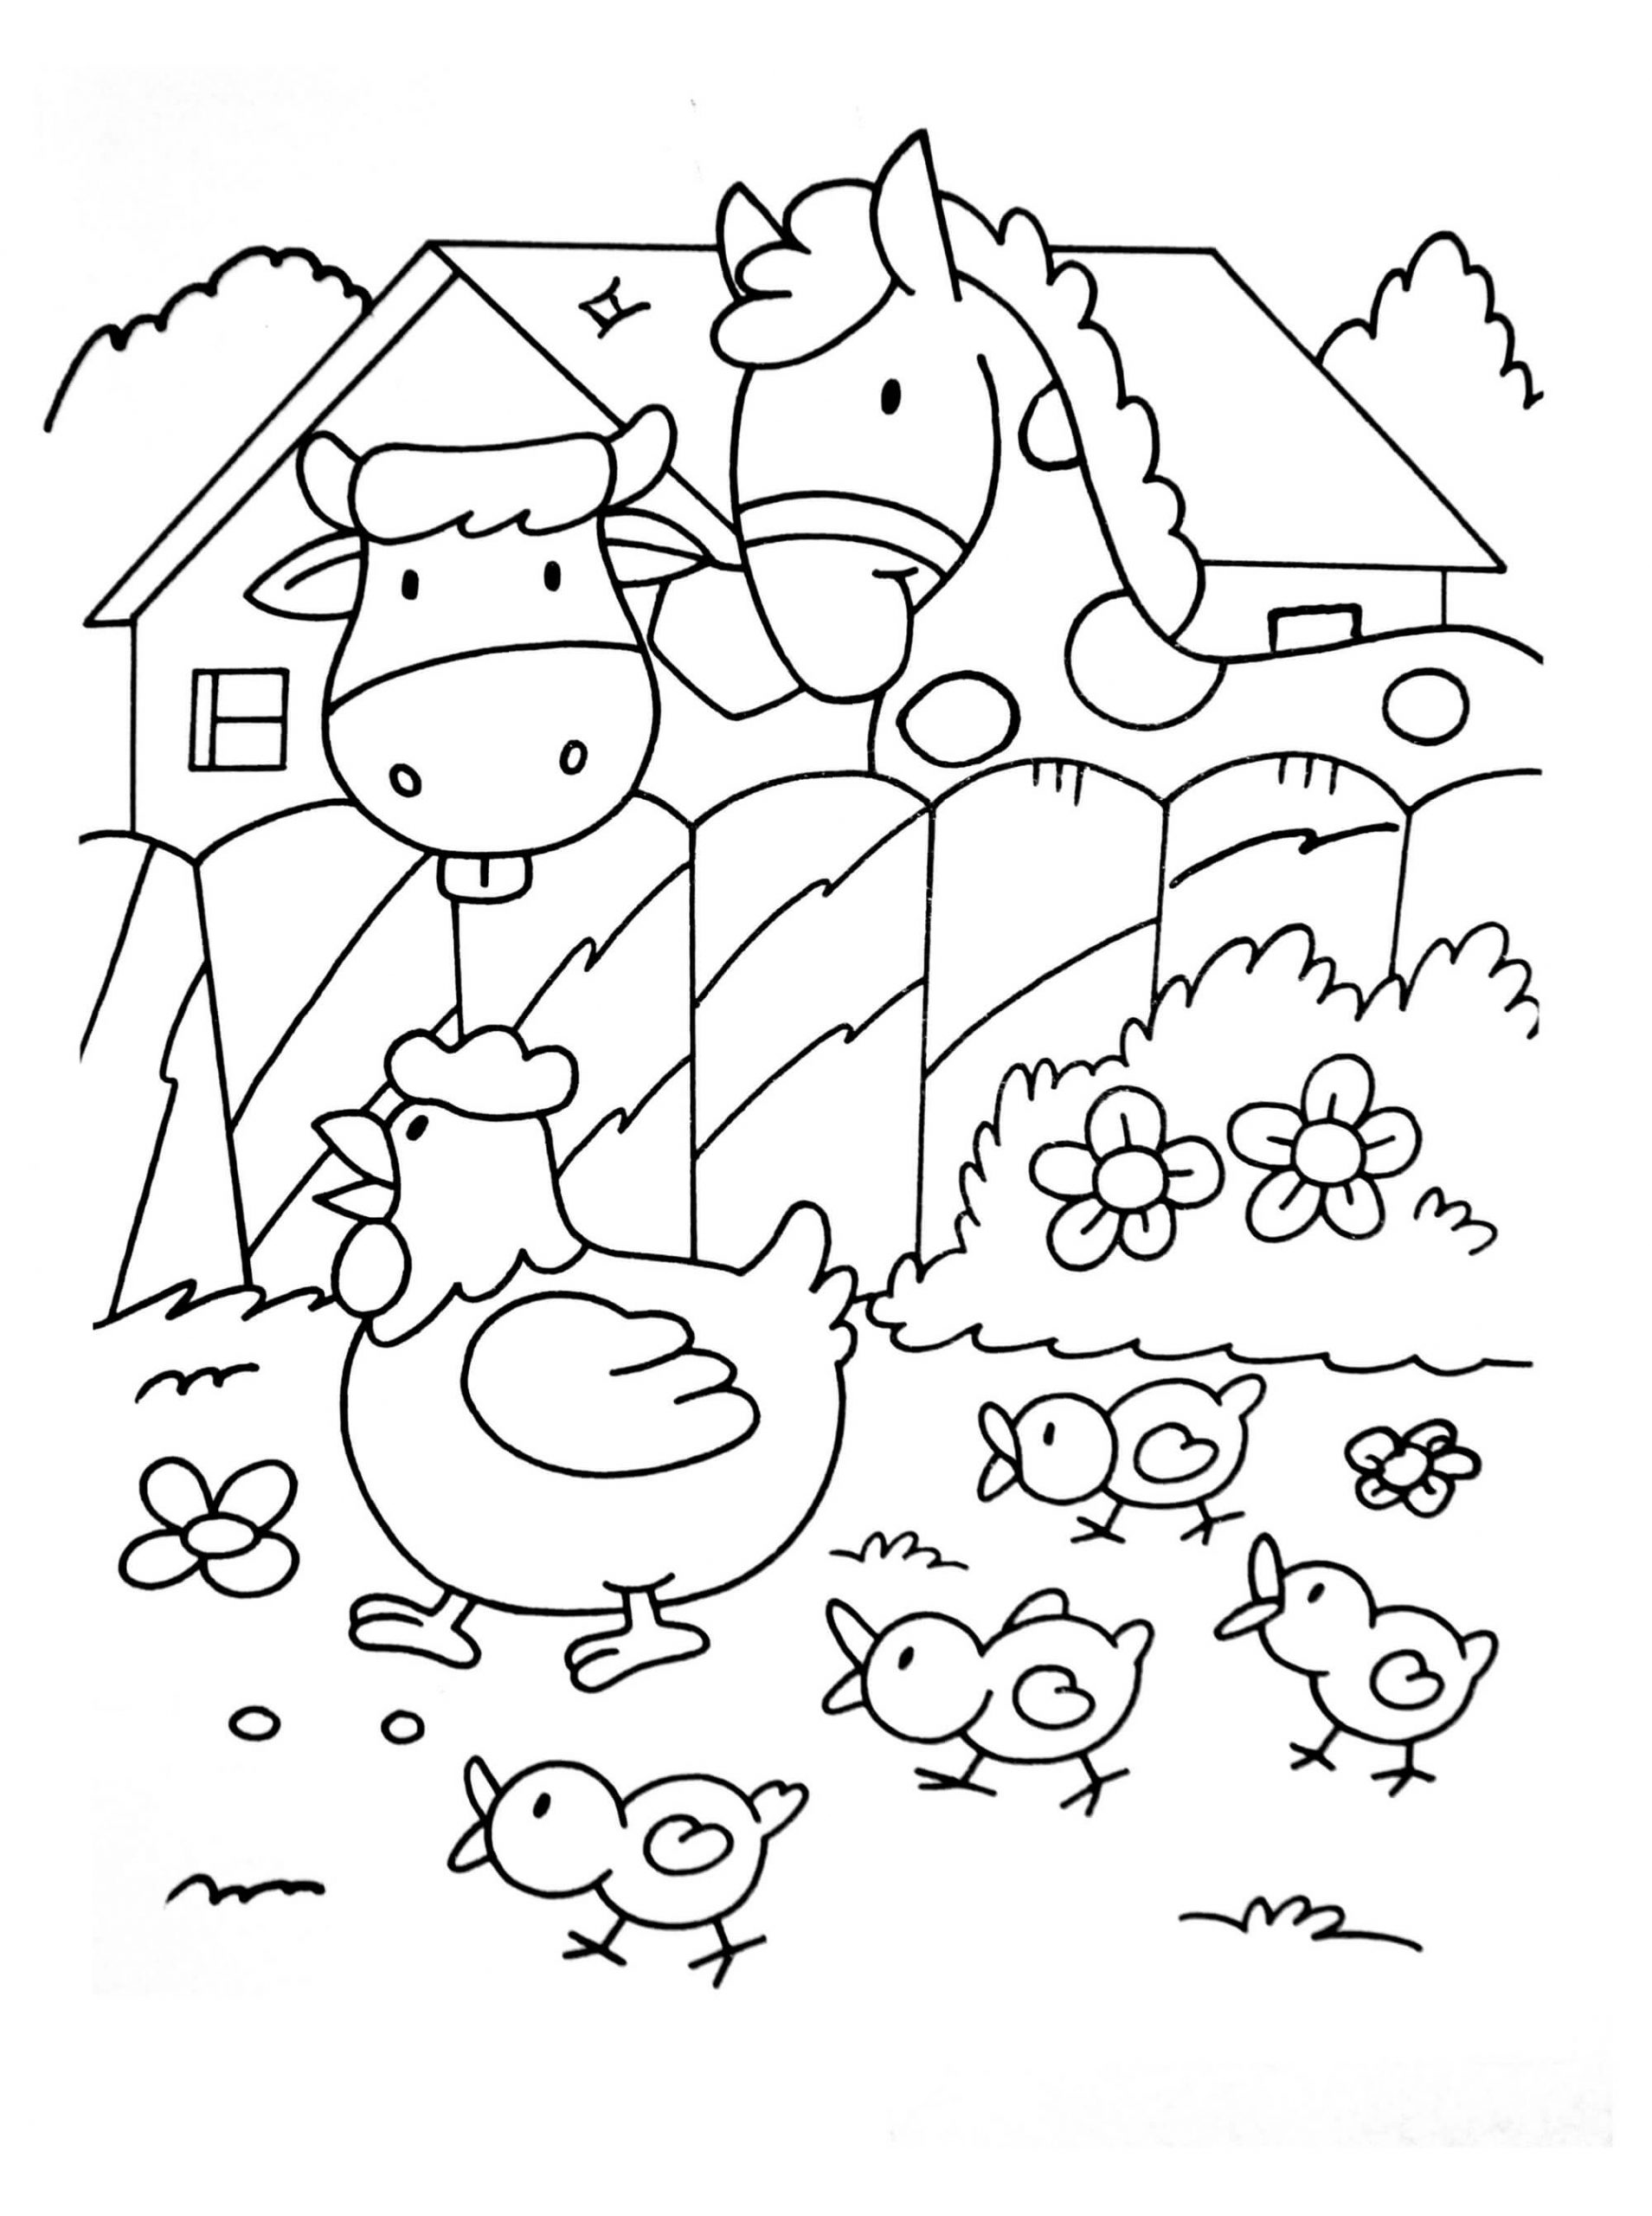 Free Farm Coloring Page Free Printable Coloring Pages for Kids